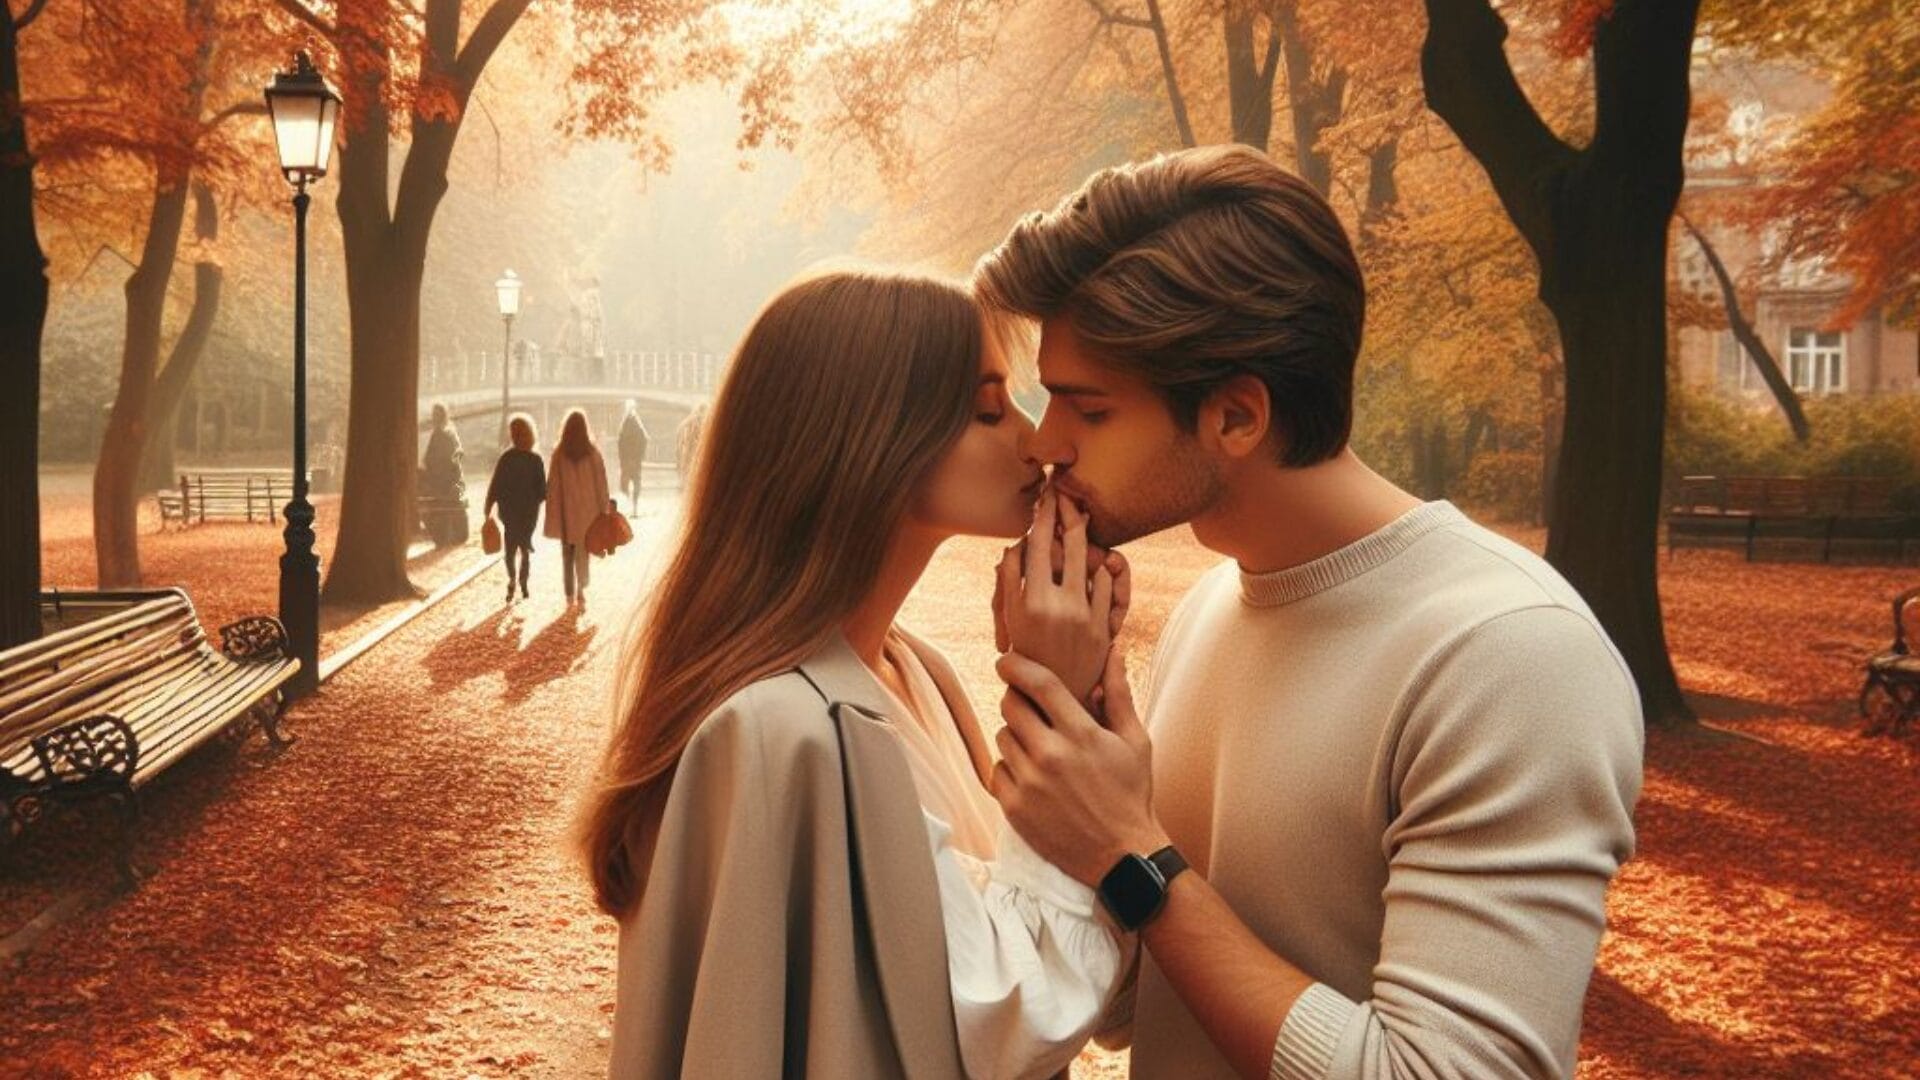 A loving couple, 30-year-old boyfriend and 25-year-old girlfriend, share a romantic moment in a serene autumn park, as he tenderly kisses her hand during their midday stroll. What Does It Mean When Your Boyfriend Kisses Your Hand?